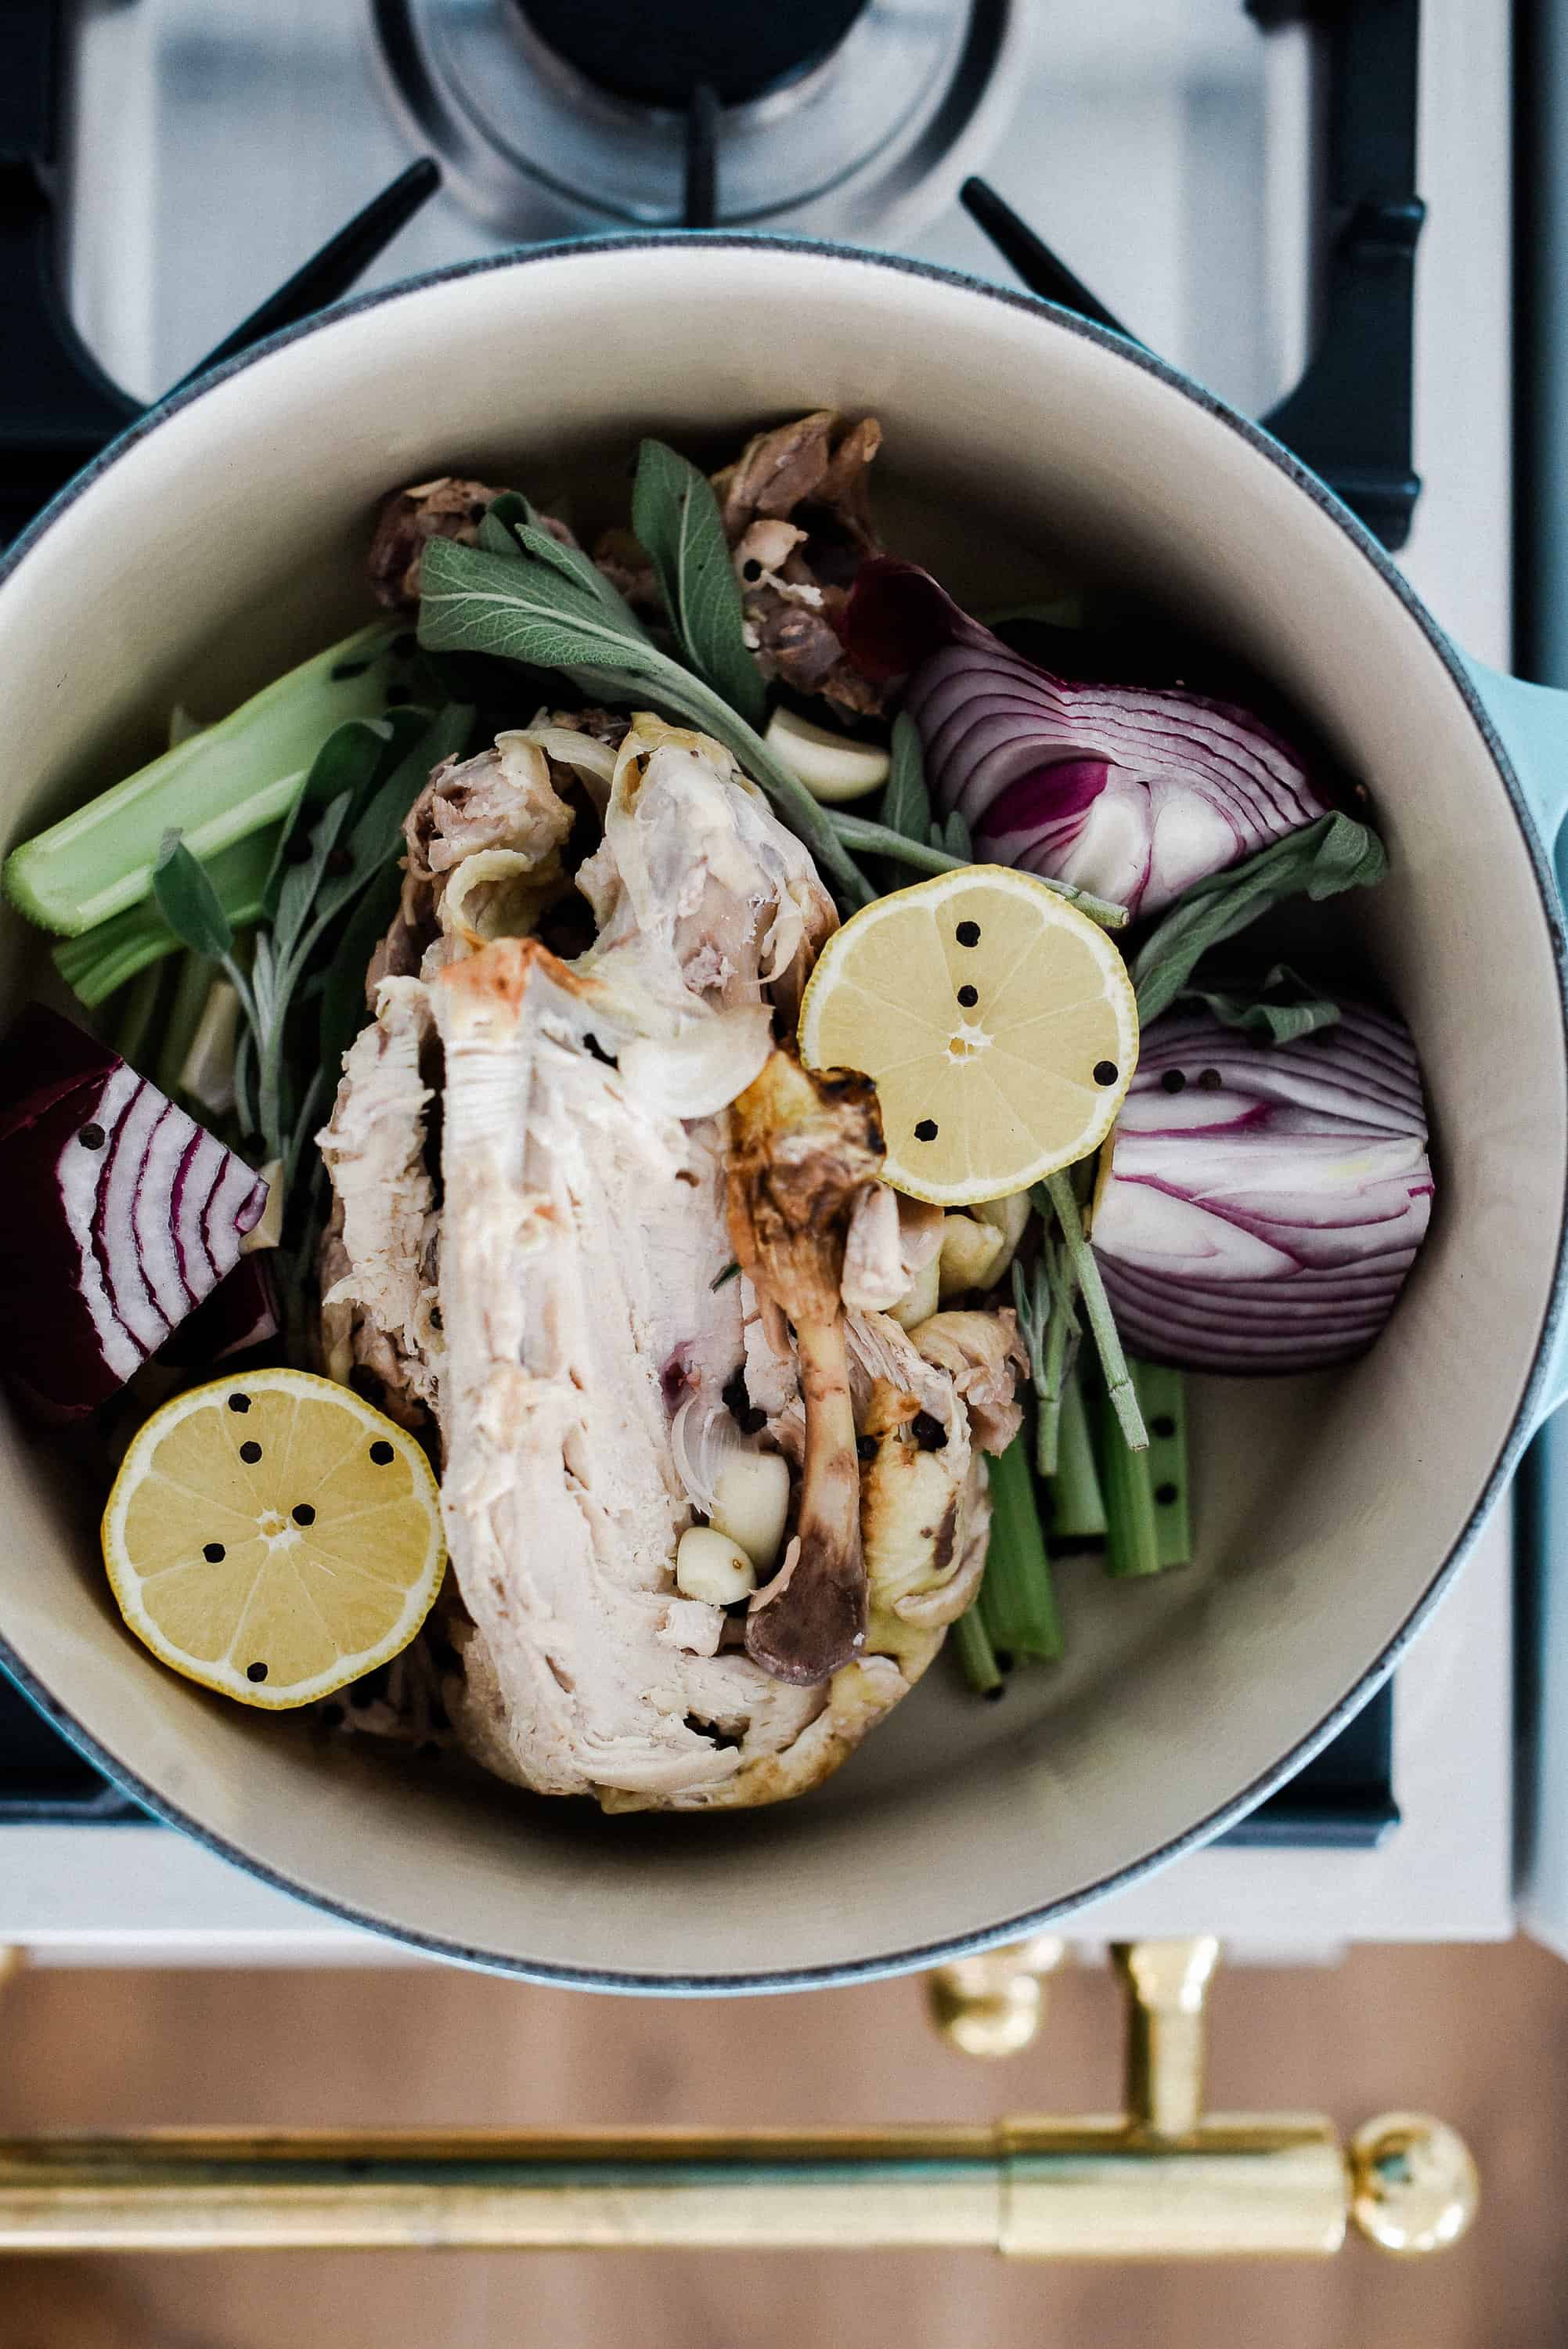 If you’re hoping to make your own chicken broth, you’re in luck! It’s one of the easiest ways to stretch your budget and consume every bit of the animal! Homemade chicken broth allows you to customize the flavor, and know exactly what’s in your broth. Now, let’s make some chicken broth!